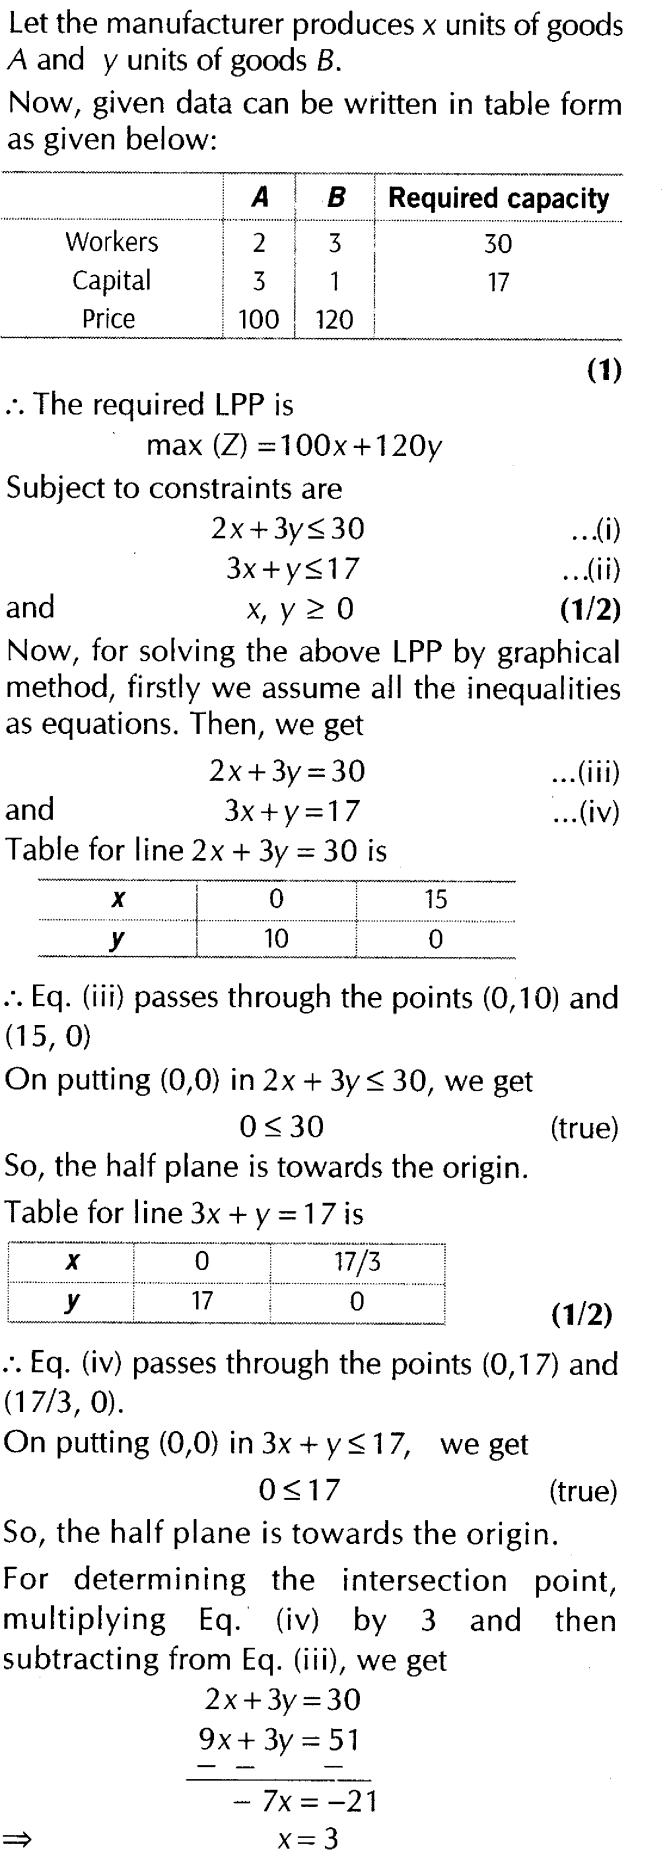 important-questions-for-class-12-maths-cbse-linear-programming-t1-q-8sjpg_Page1